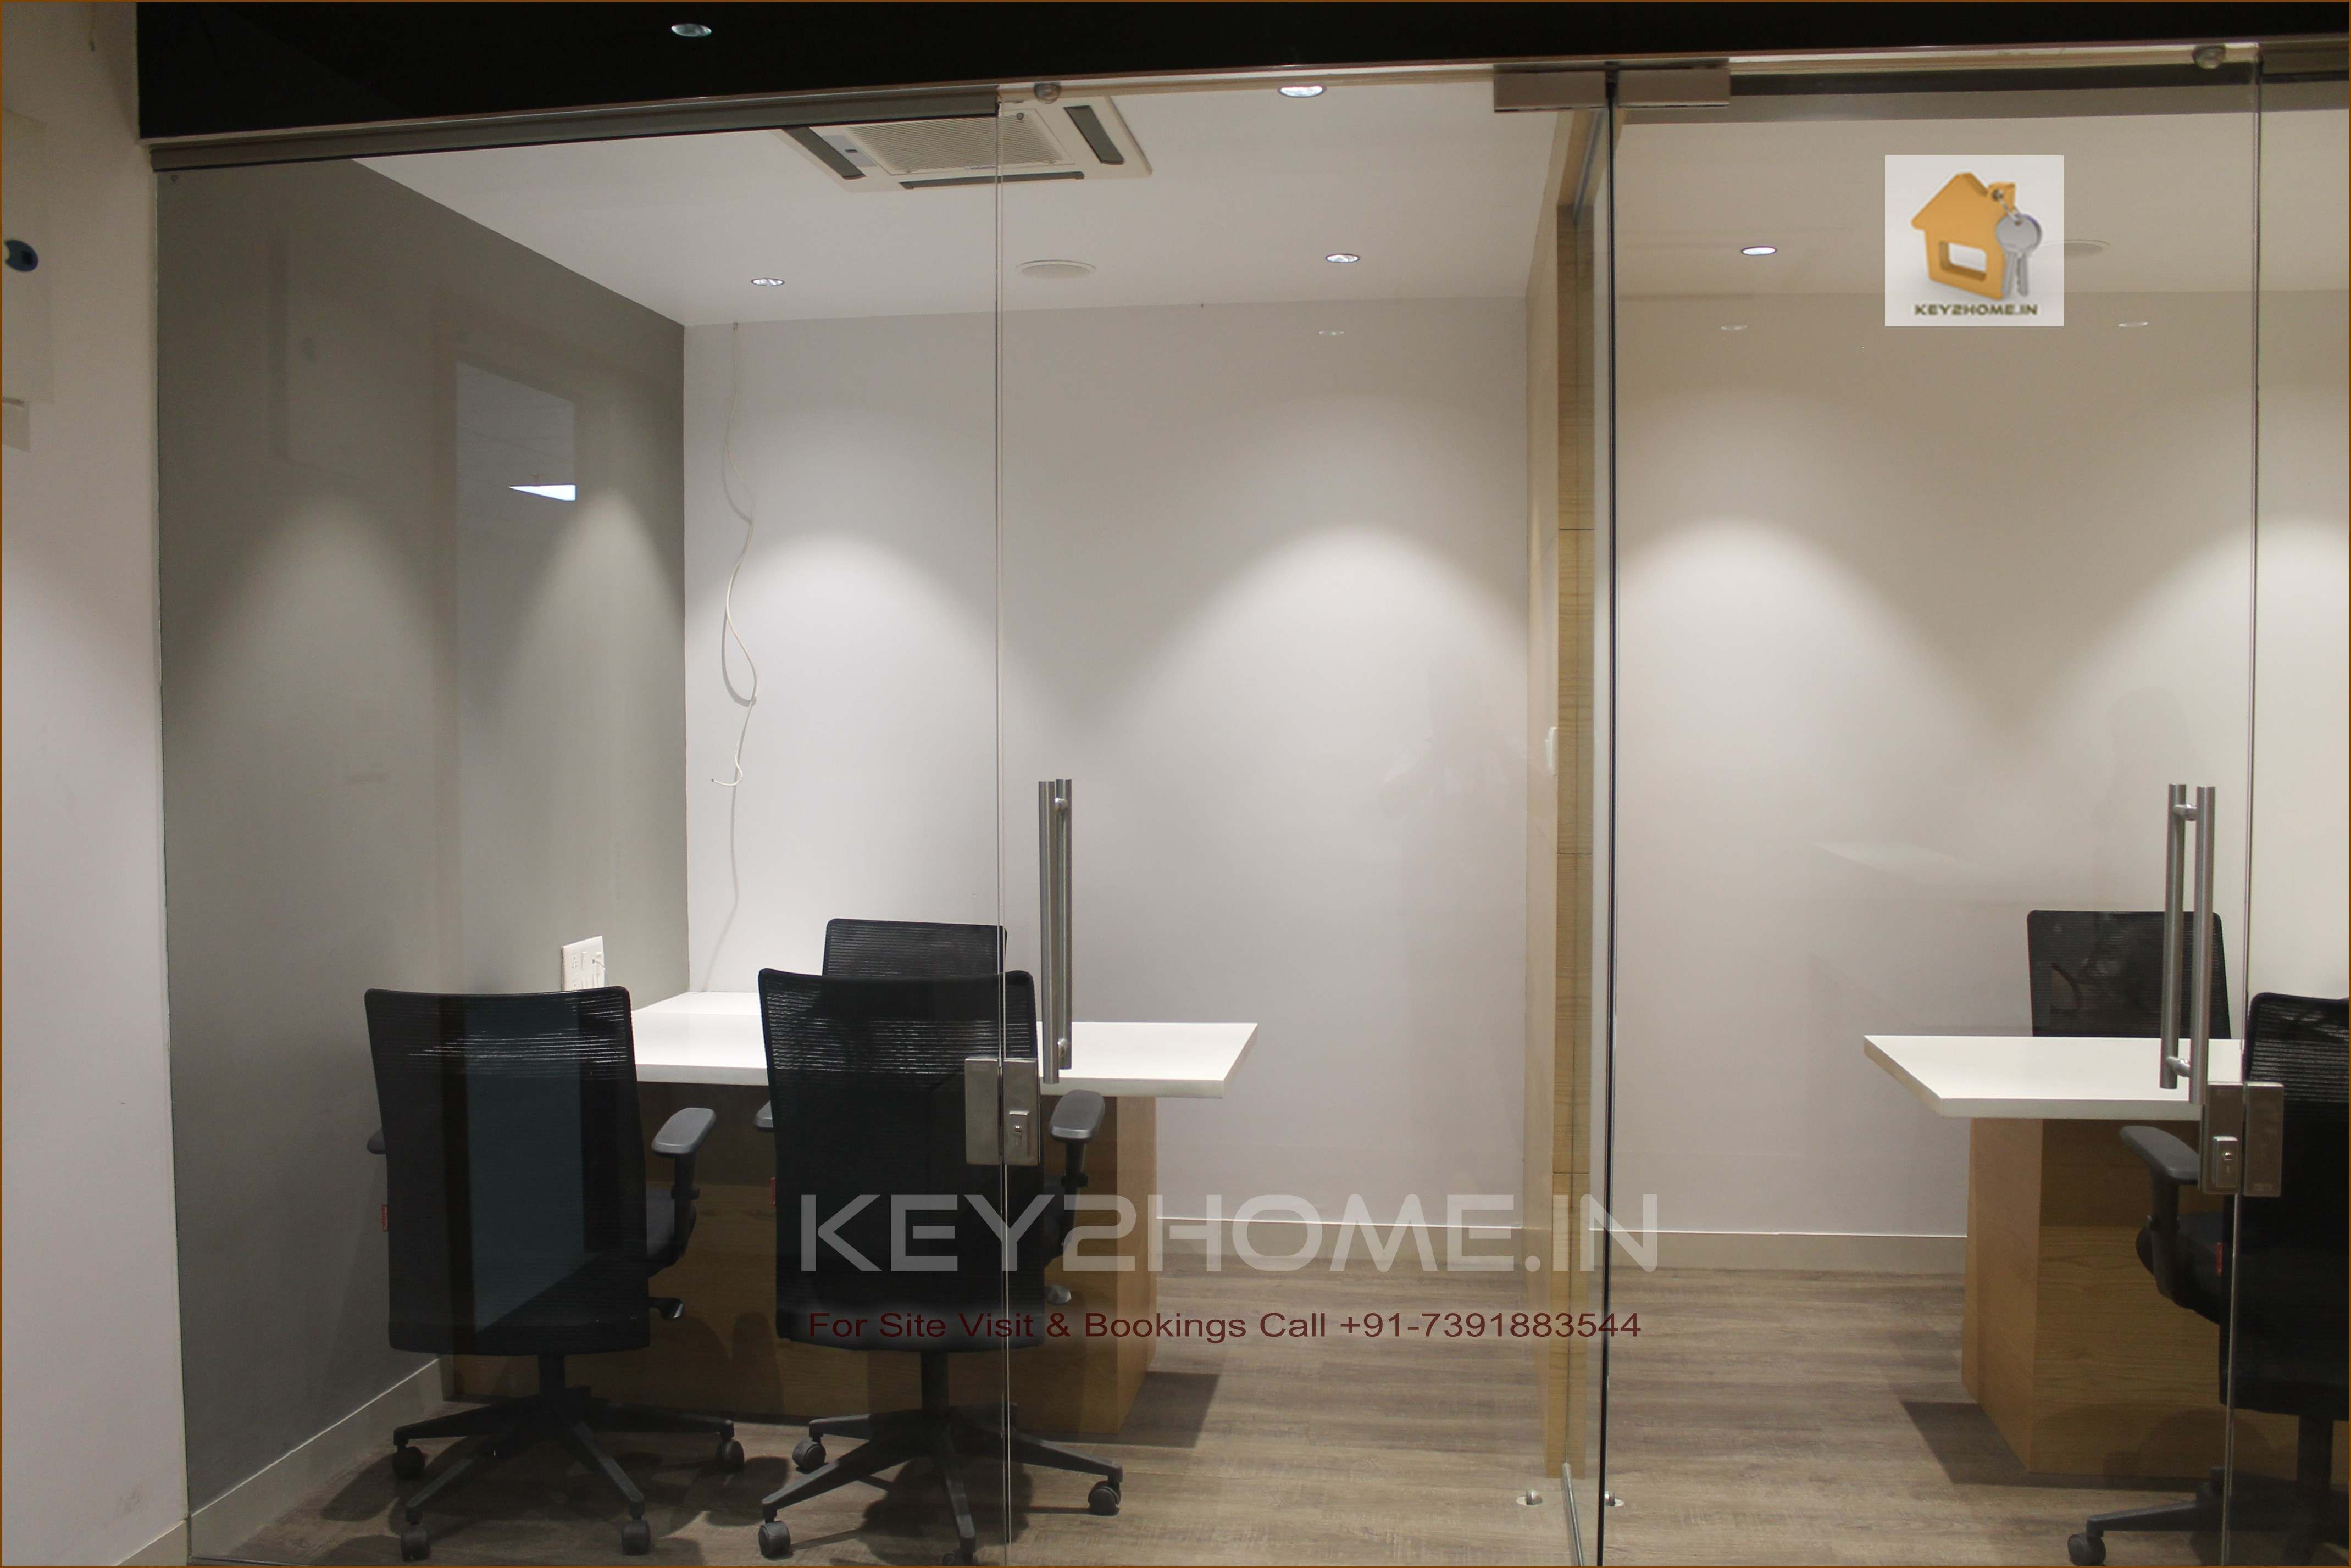 Commercial Office space on rent in Hinjewadi near wakad bridge combine view of single cabins 2